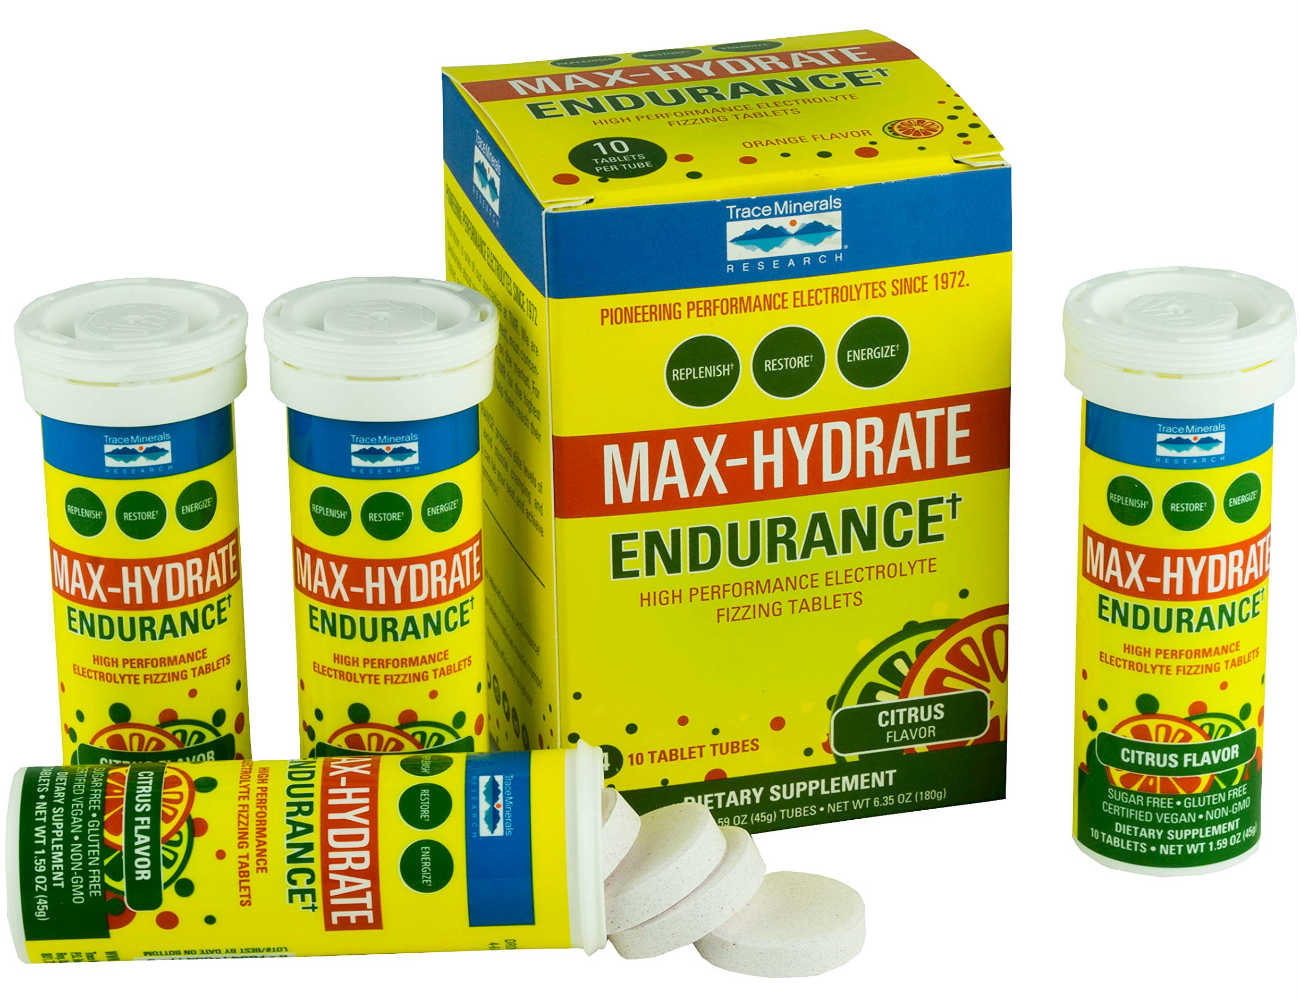 Trace Minerals Research: Max-Hydrate Endurance 4 tube box